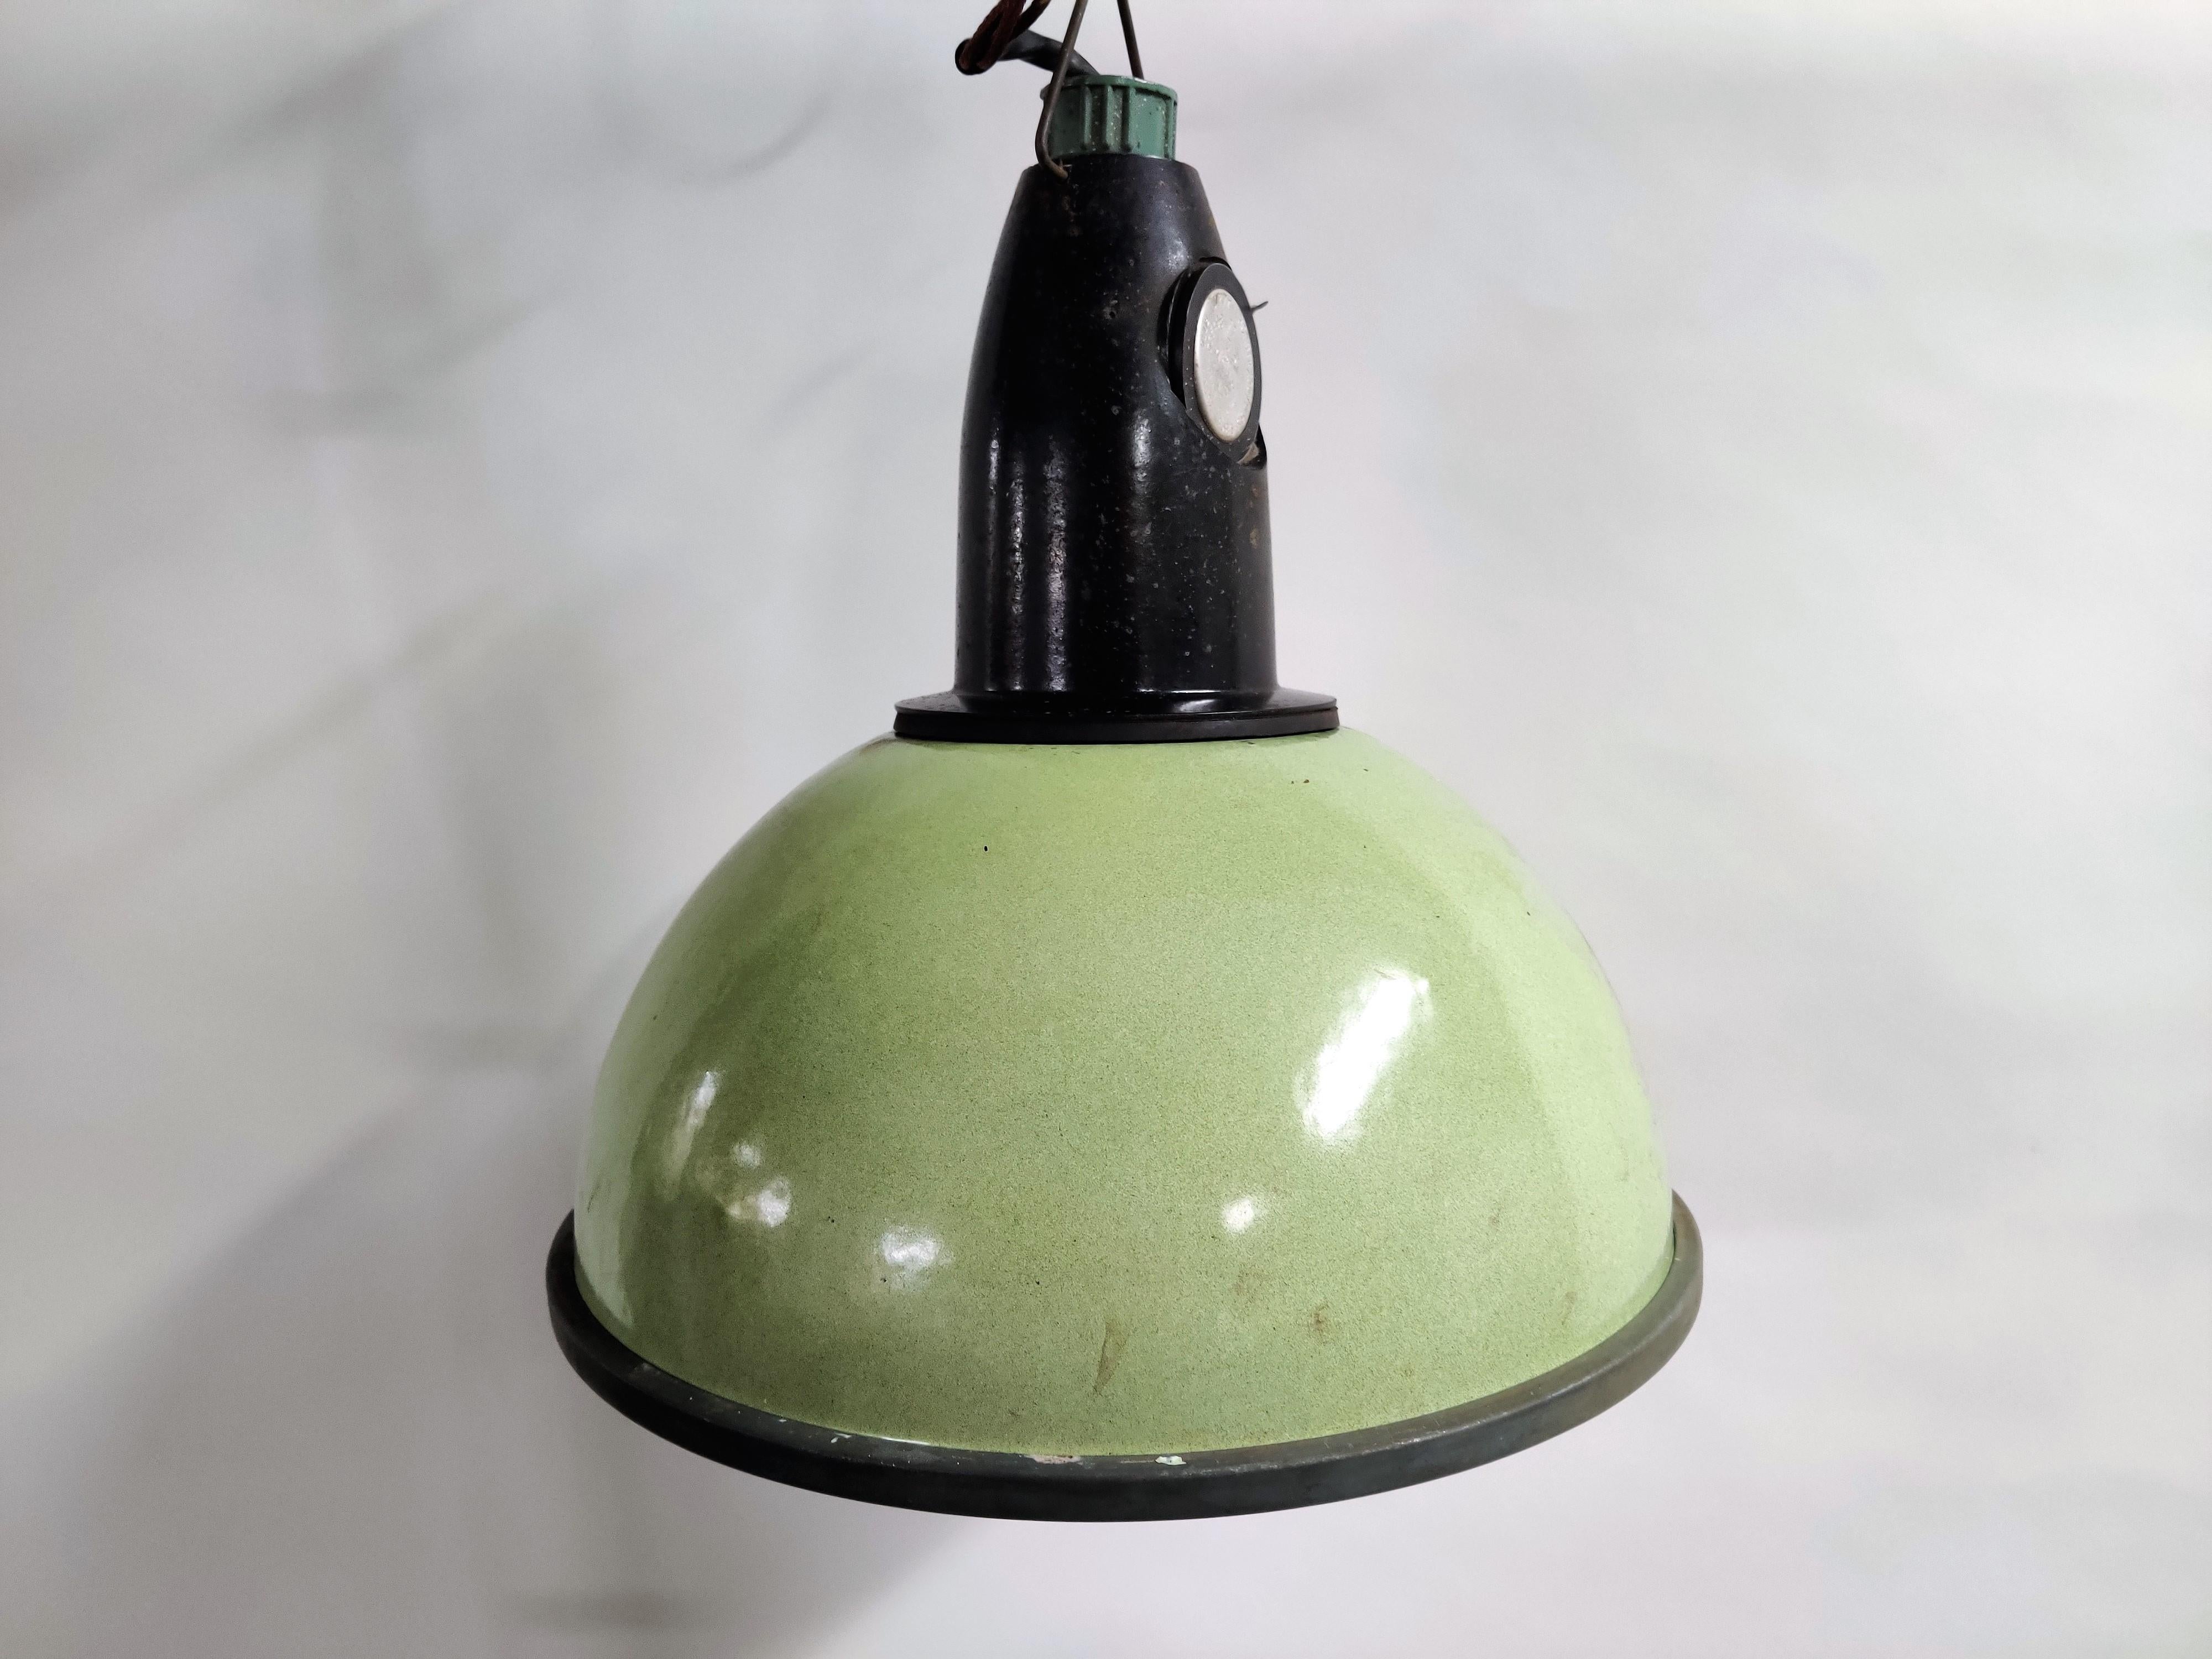 Enamel Vintage Industrial Pendant Lights with Glass '3 Available', 1960s